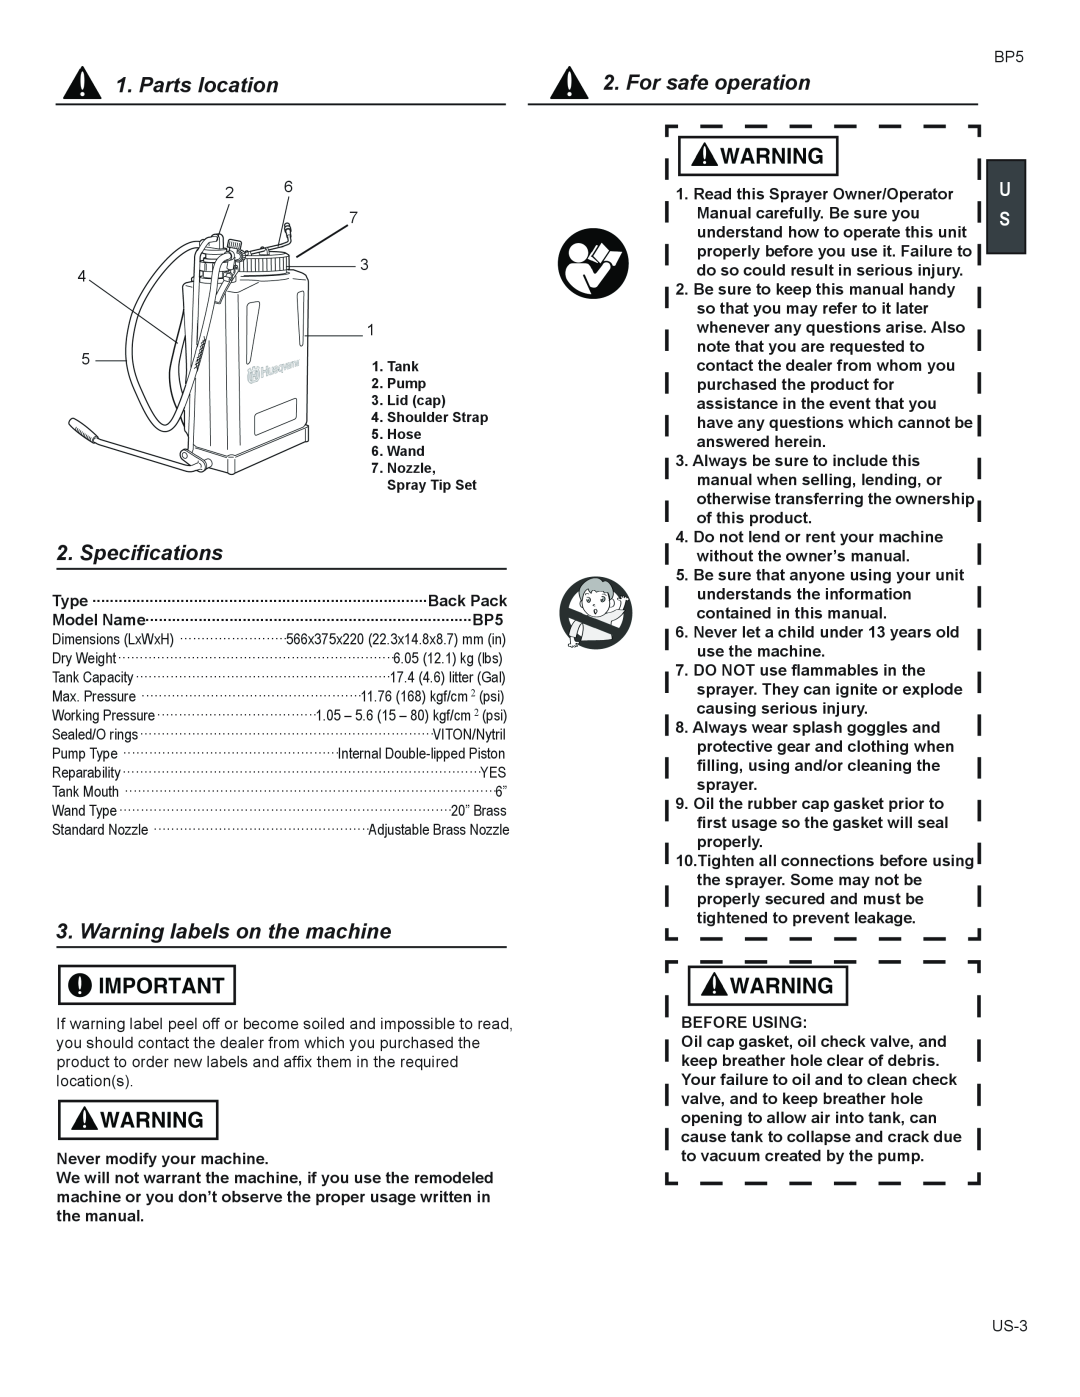 Husqvarna BP5 manual Parts location, Specifications, Warning labels on the machine, For safe operation 